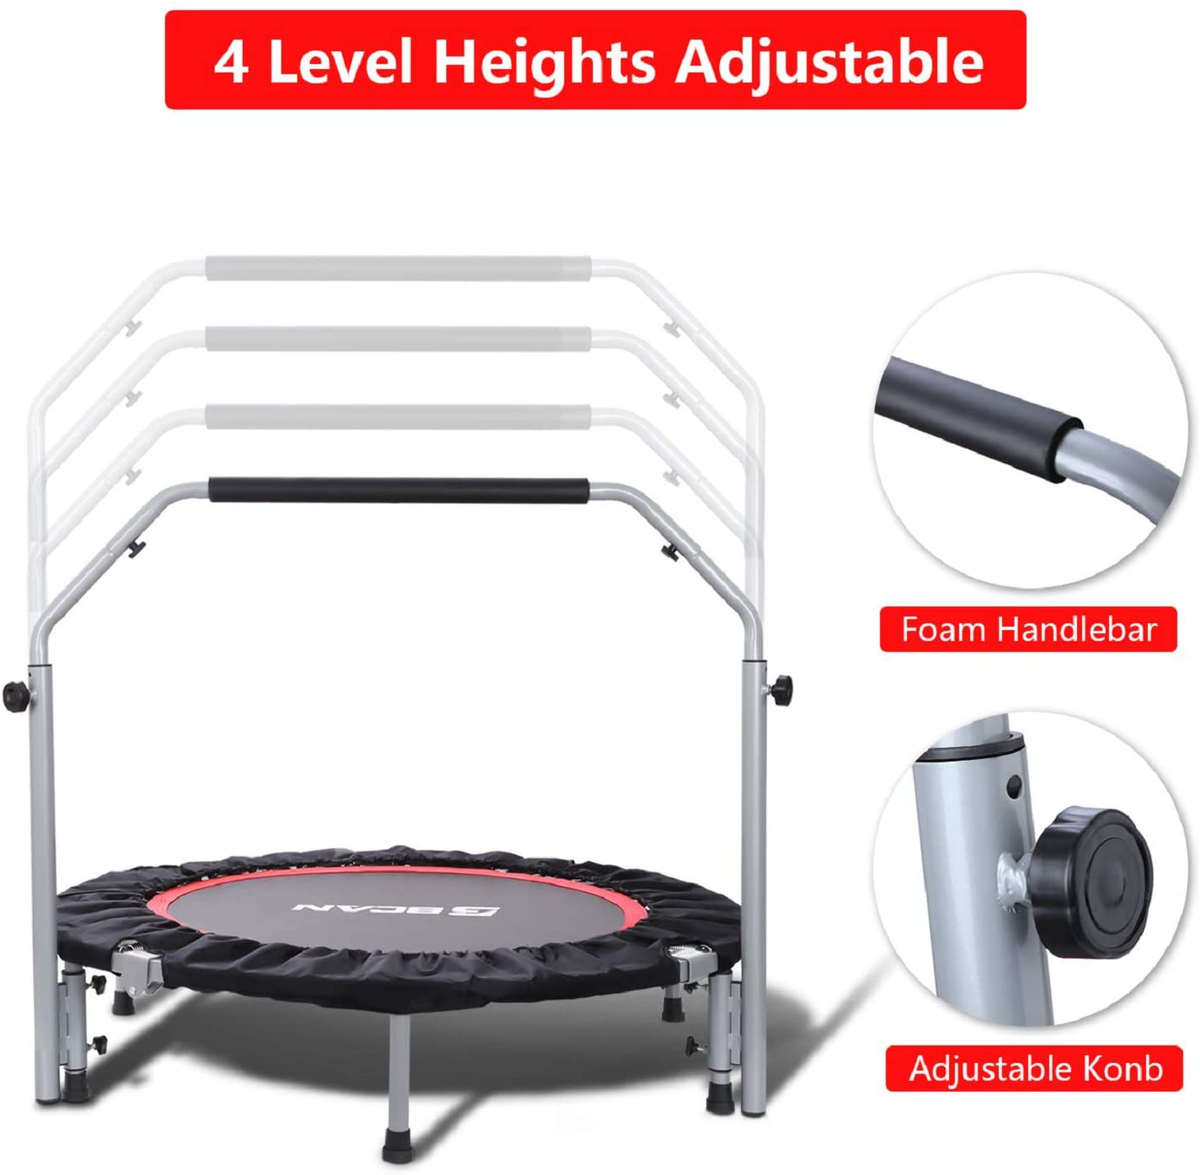 BCAN 40 Foldable Mini Trampoline, Fitness Rebounder with